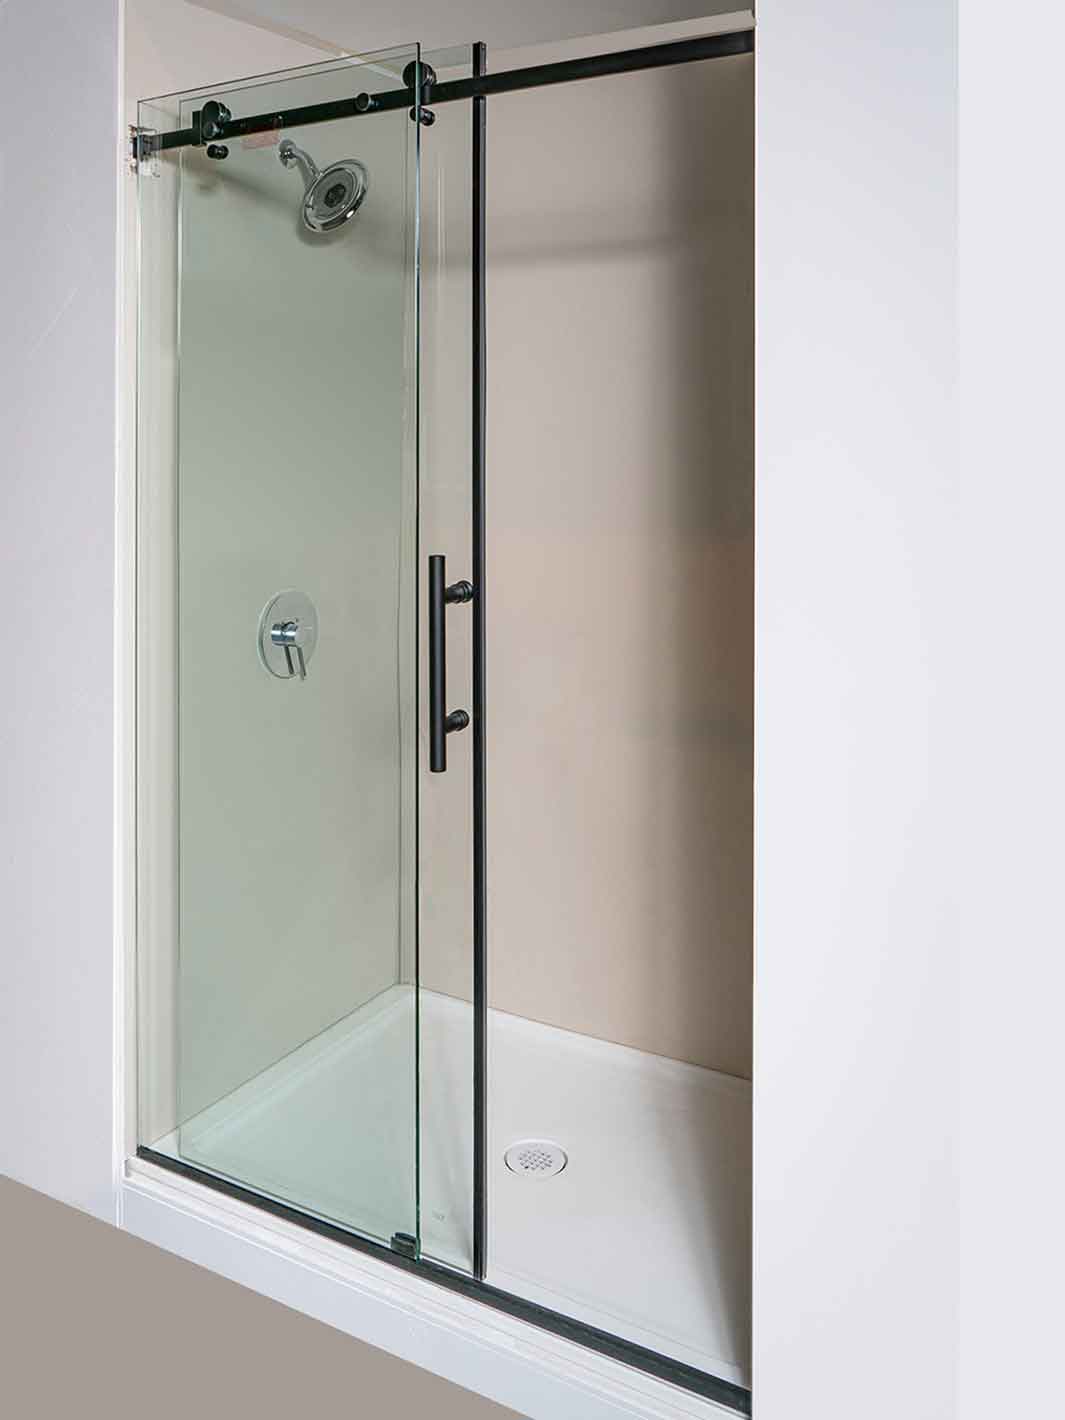 48 inch shower glass with black hardware